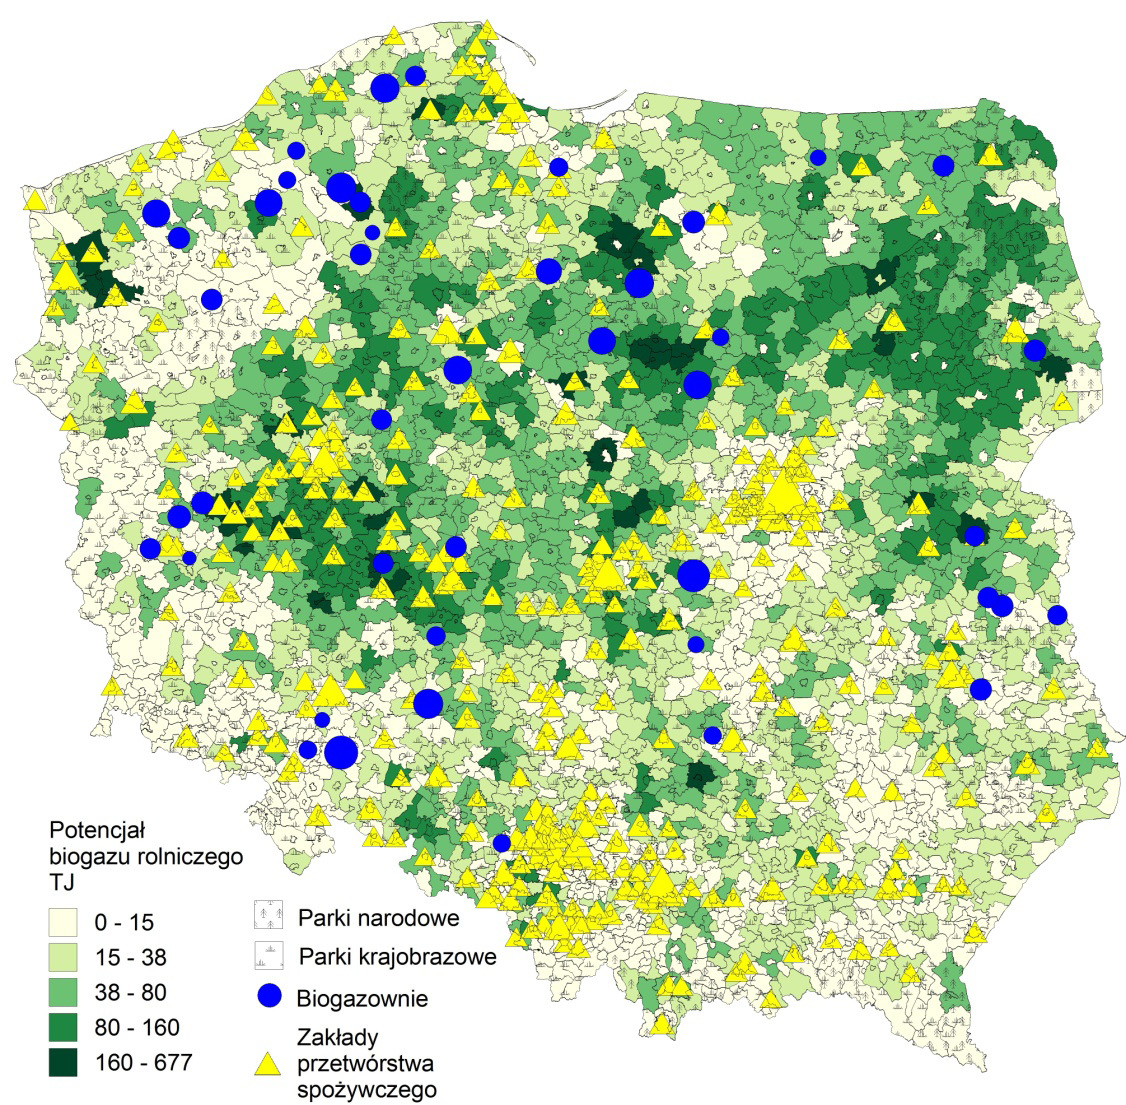 pl 2014] Source: own calculations based on data from the Agricultural Market [www.arr.gov.